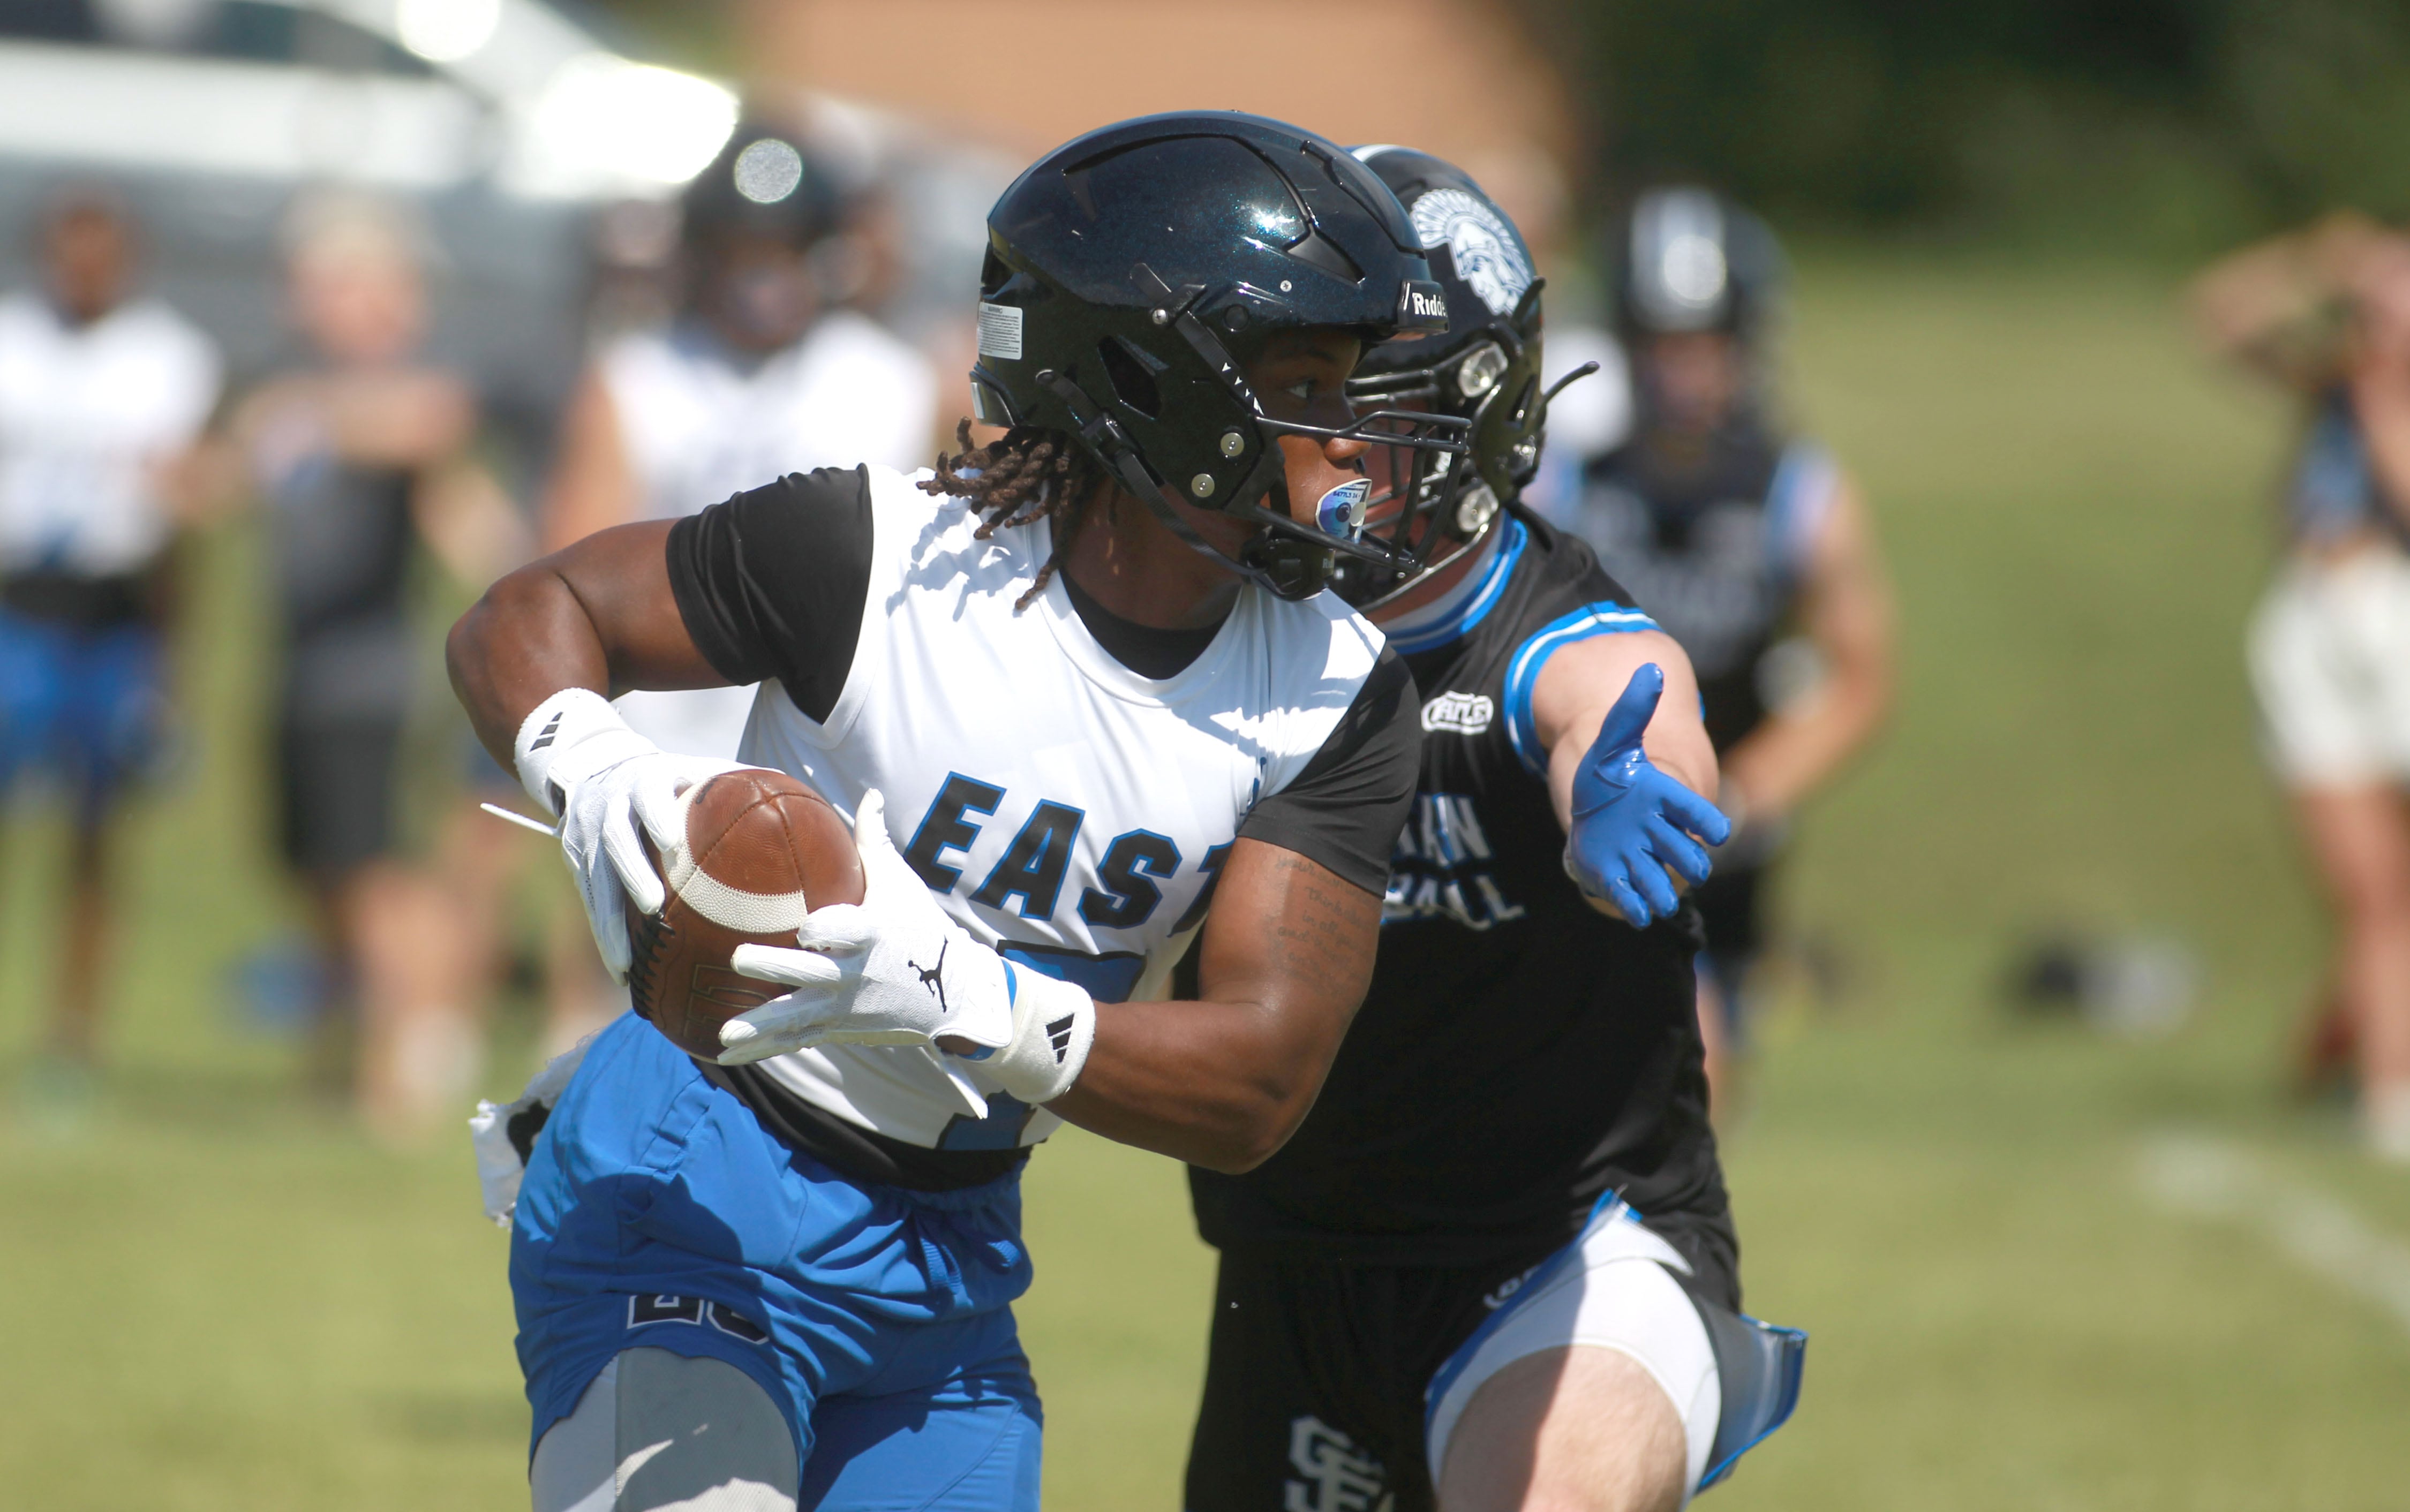 Lincoln-Way East’s Zion Gist finds his place at Western Michigan